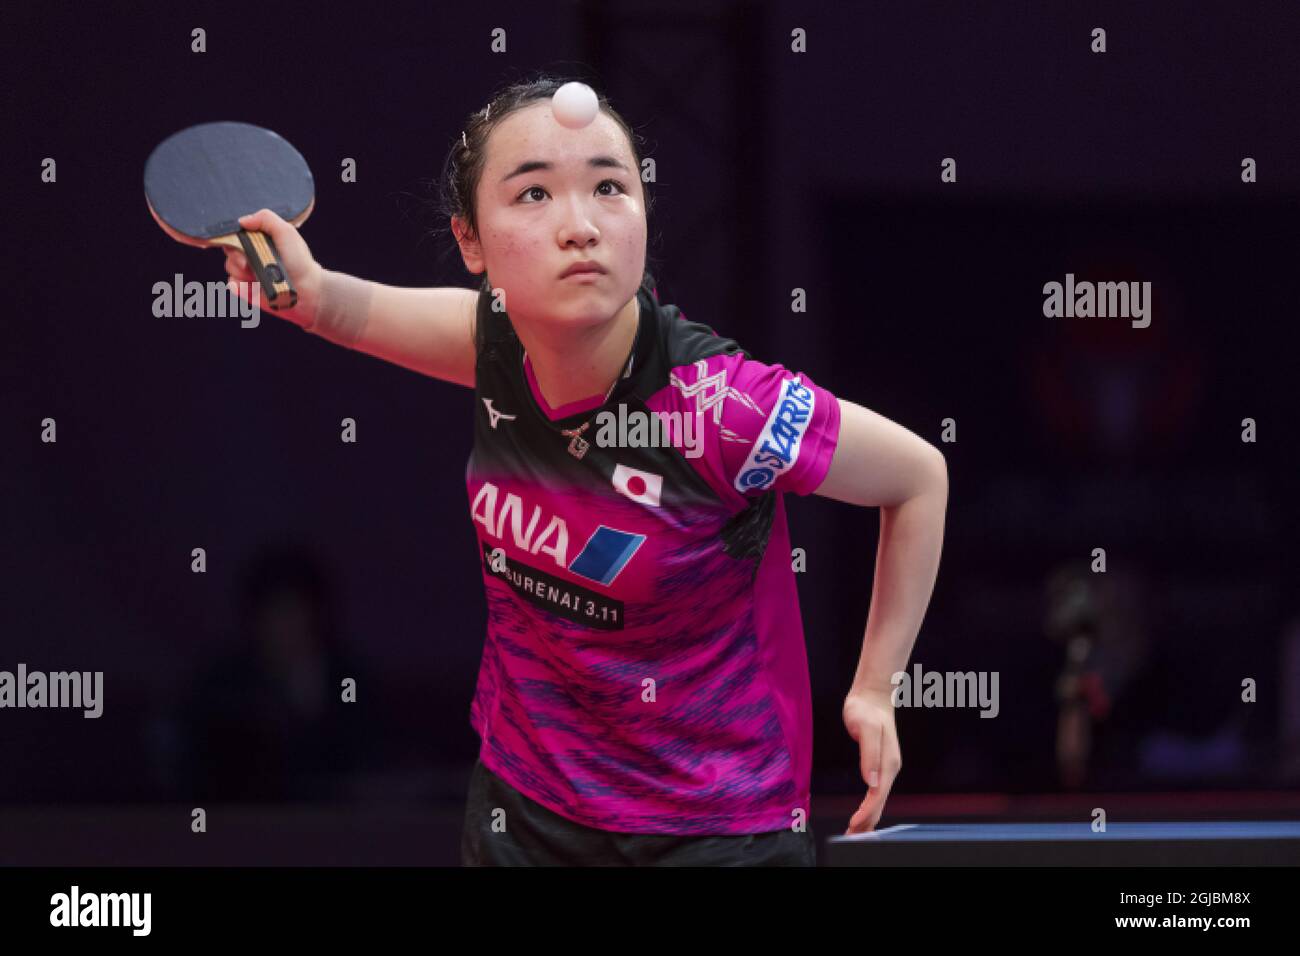 Ito Mima of Japan, in action against Liu Shiwen of China, during the women's quarterfinal table tennis match at the Swedish Open Championships in Eriksdalshallen in Stockholm, Sweden, on Nov. 03, 2018. Photo: Stina Stjernkvist / TT / code 11610  Stock Photo